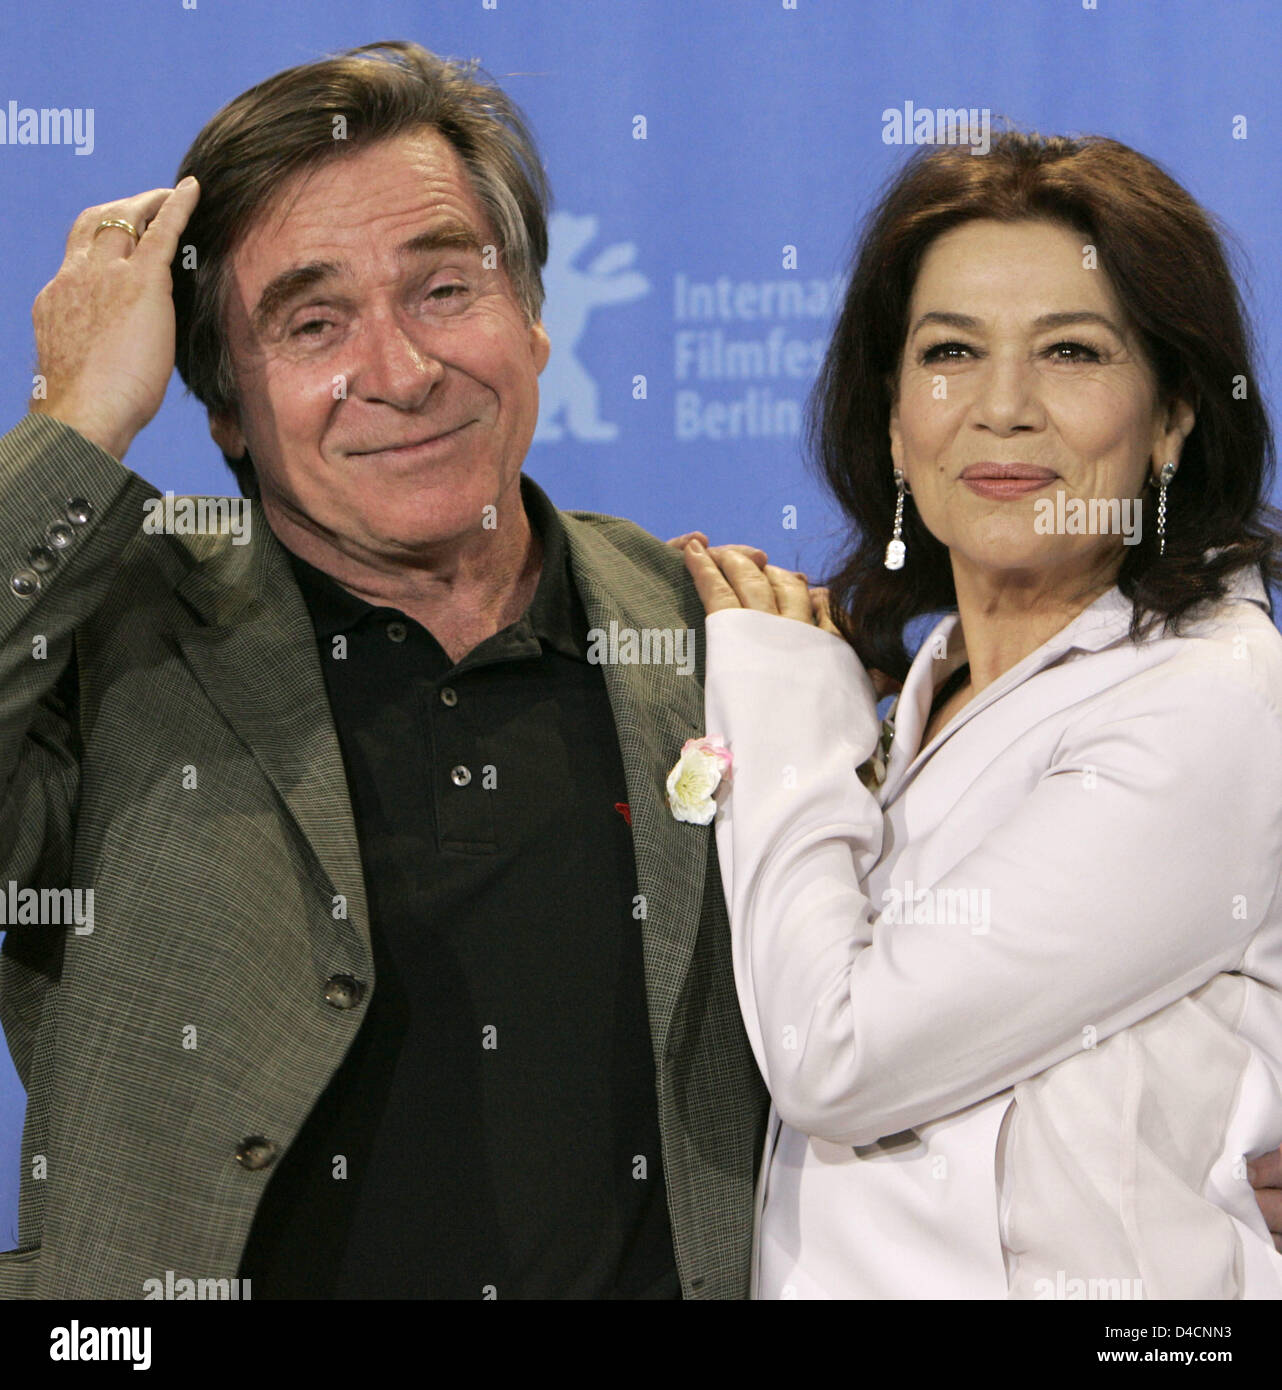 German actor Elmar Wepper and actress Hannelore Elsner pictured during a photo call for the film 'Kirschblueten - Hanami' at the 58th Berlin International Film Festival in Berlin, 11 February 2008. The film runs in the regular competition for the 'Golden Bear' and 'Silver Bear' awards at the 58th Berlin Film Festival. Photo: JAN WOITAS Stock Photo